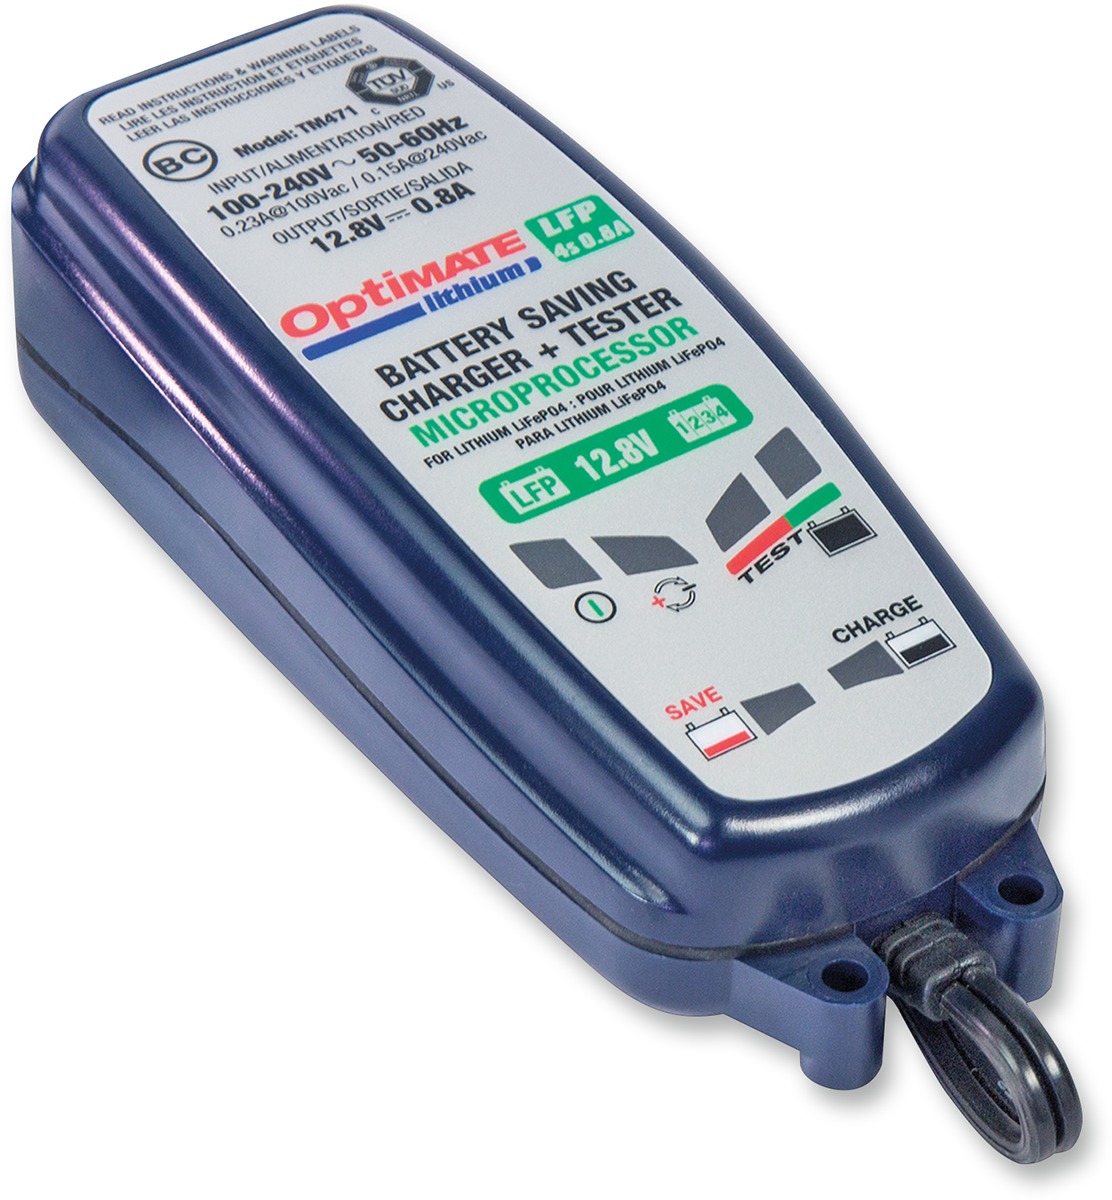 Optimate Lithium 0.8A Battery Charger - Click Image to Close